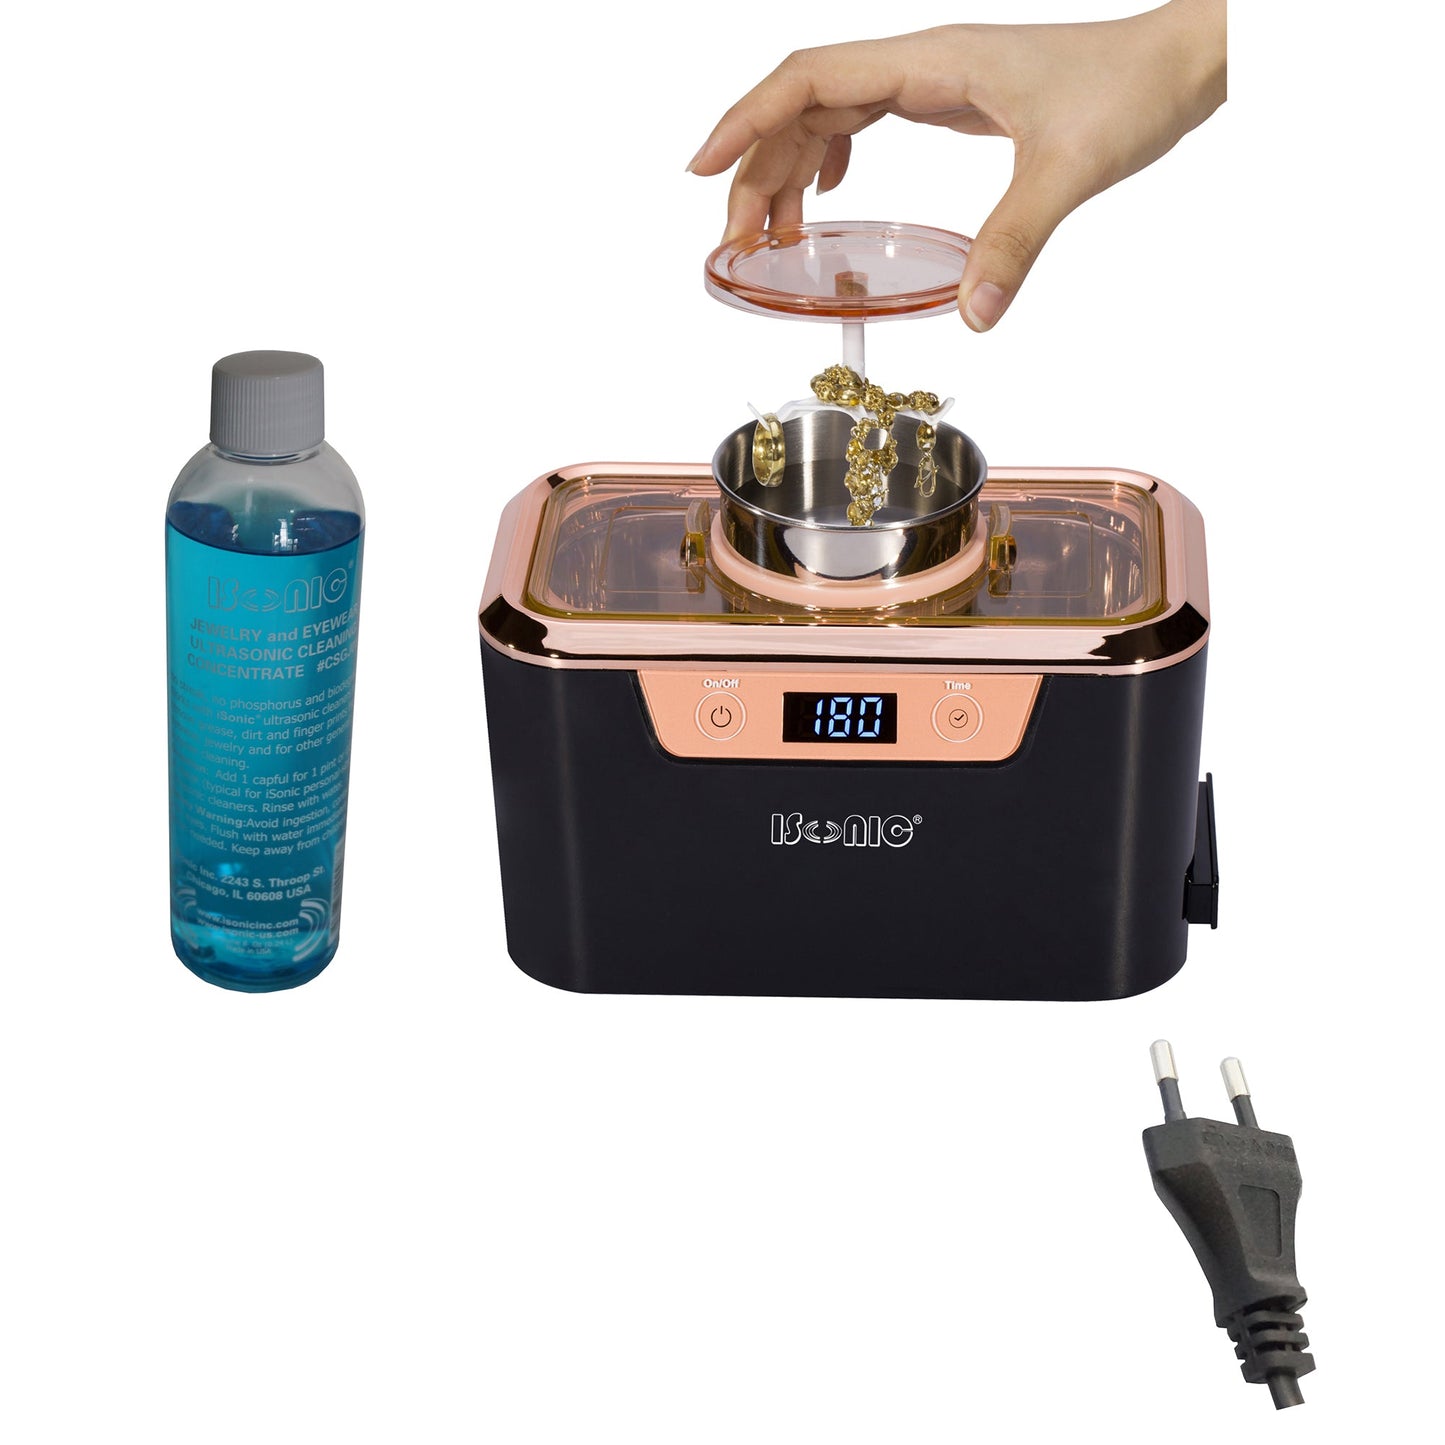 DS310-BR+CSGJ01 | iSonic® Miniaturized Commercial Ultrasonic Cleaner, with integrated ss. beaker plus Jewelry/Eyewear Cleaning Solution Concentrate, Free Shipping!